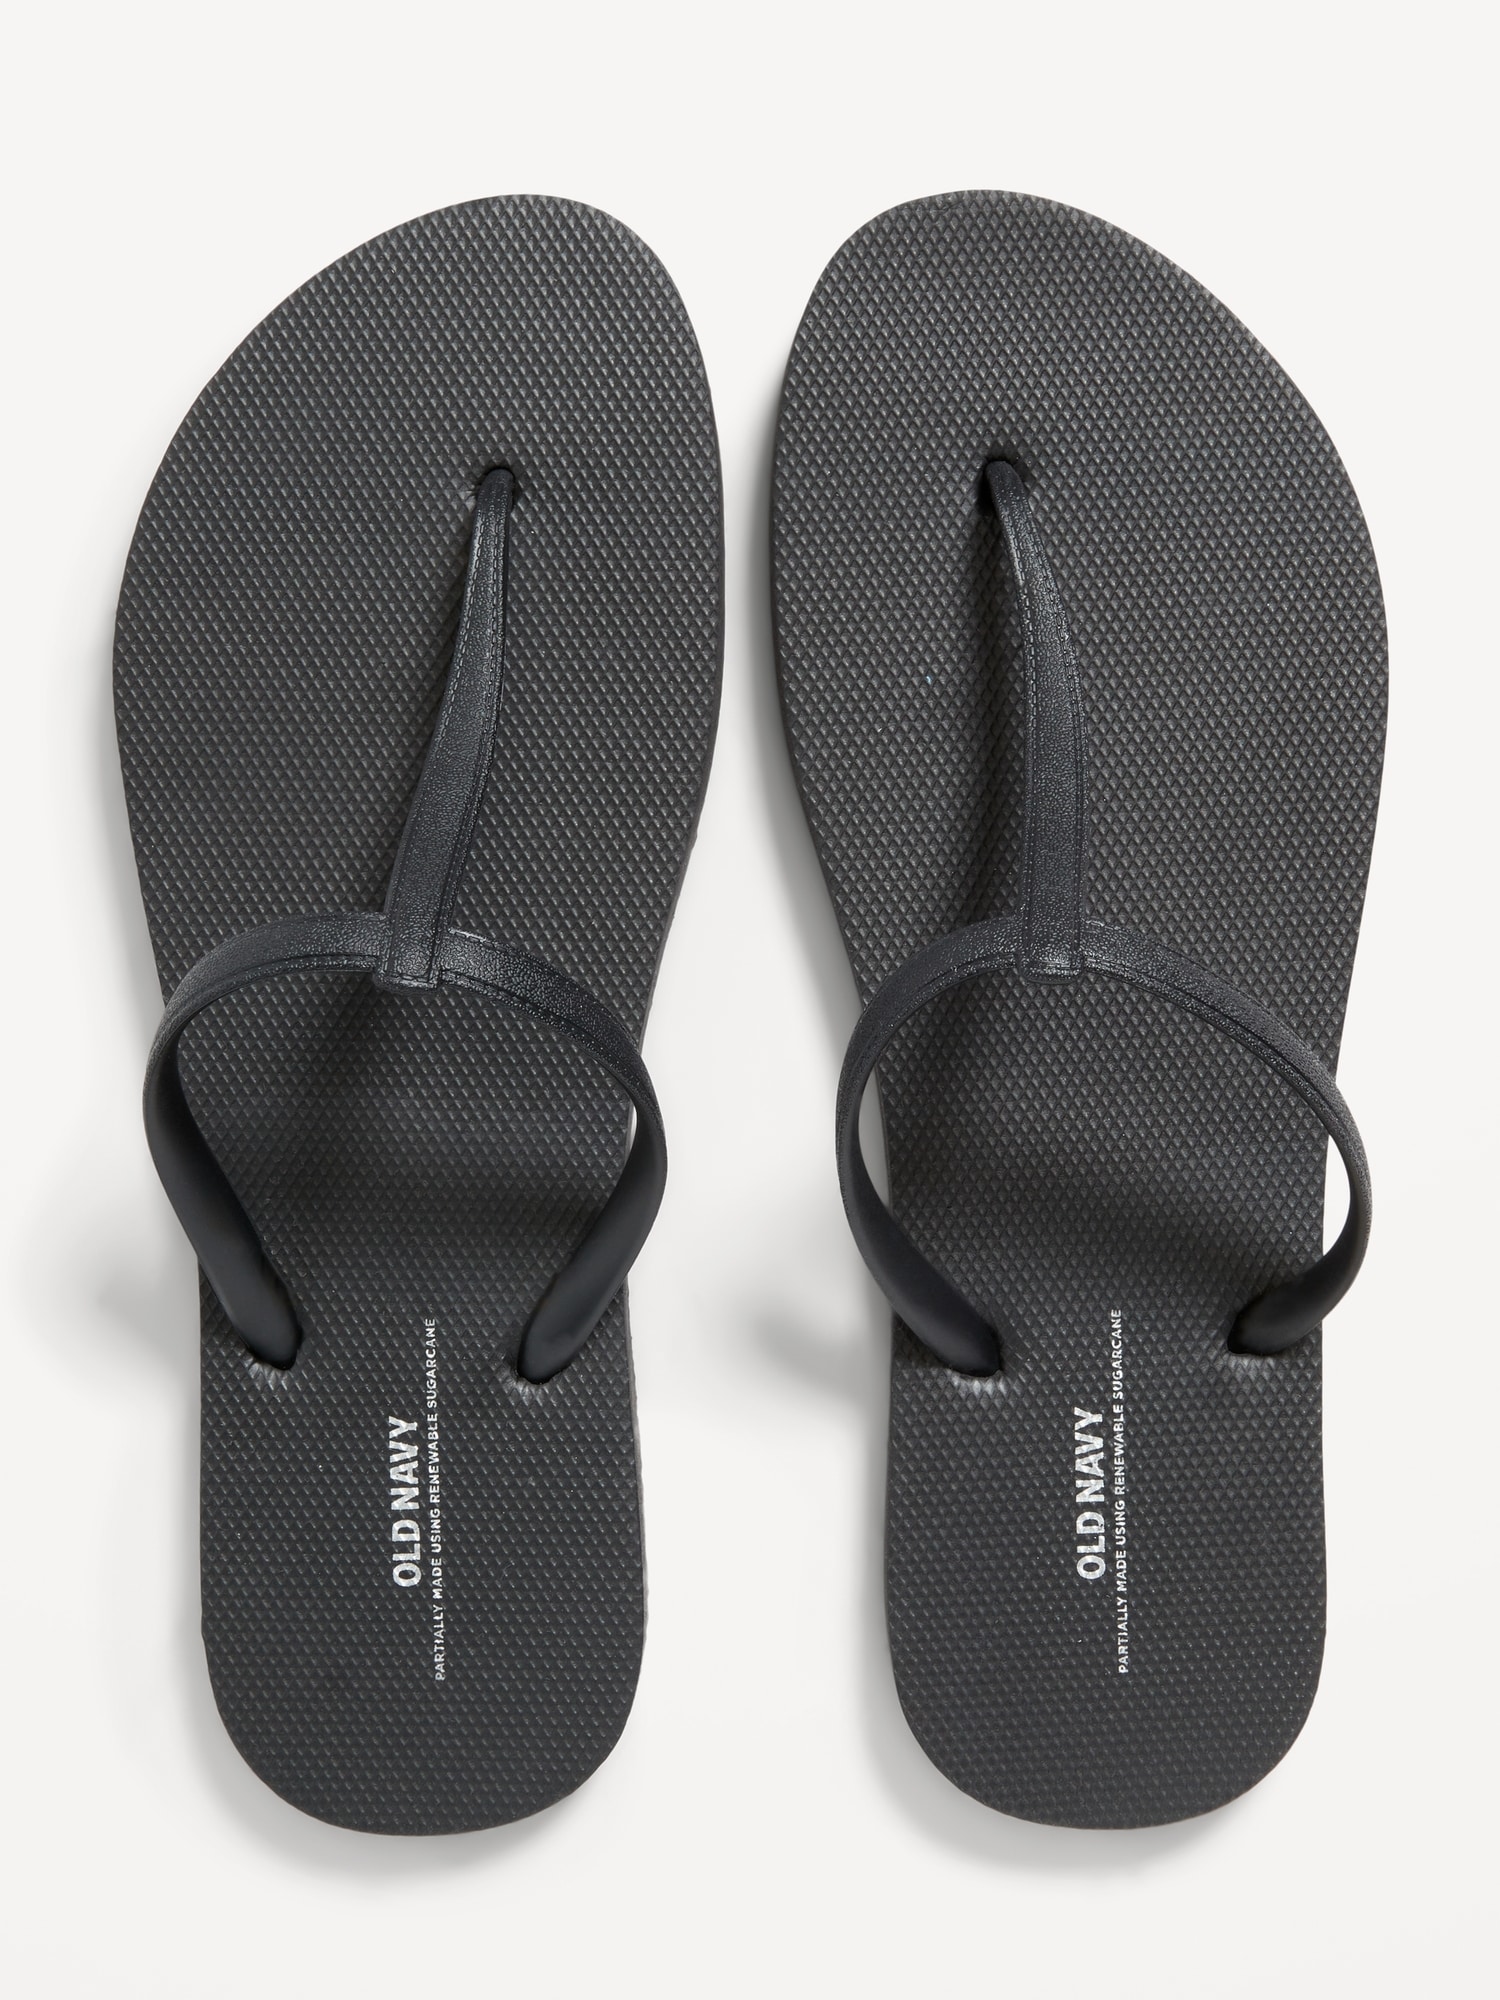 T-Strap Sandals Sandals (Partially Plant-Based)